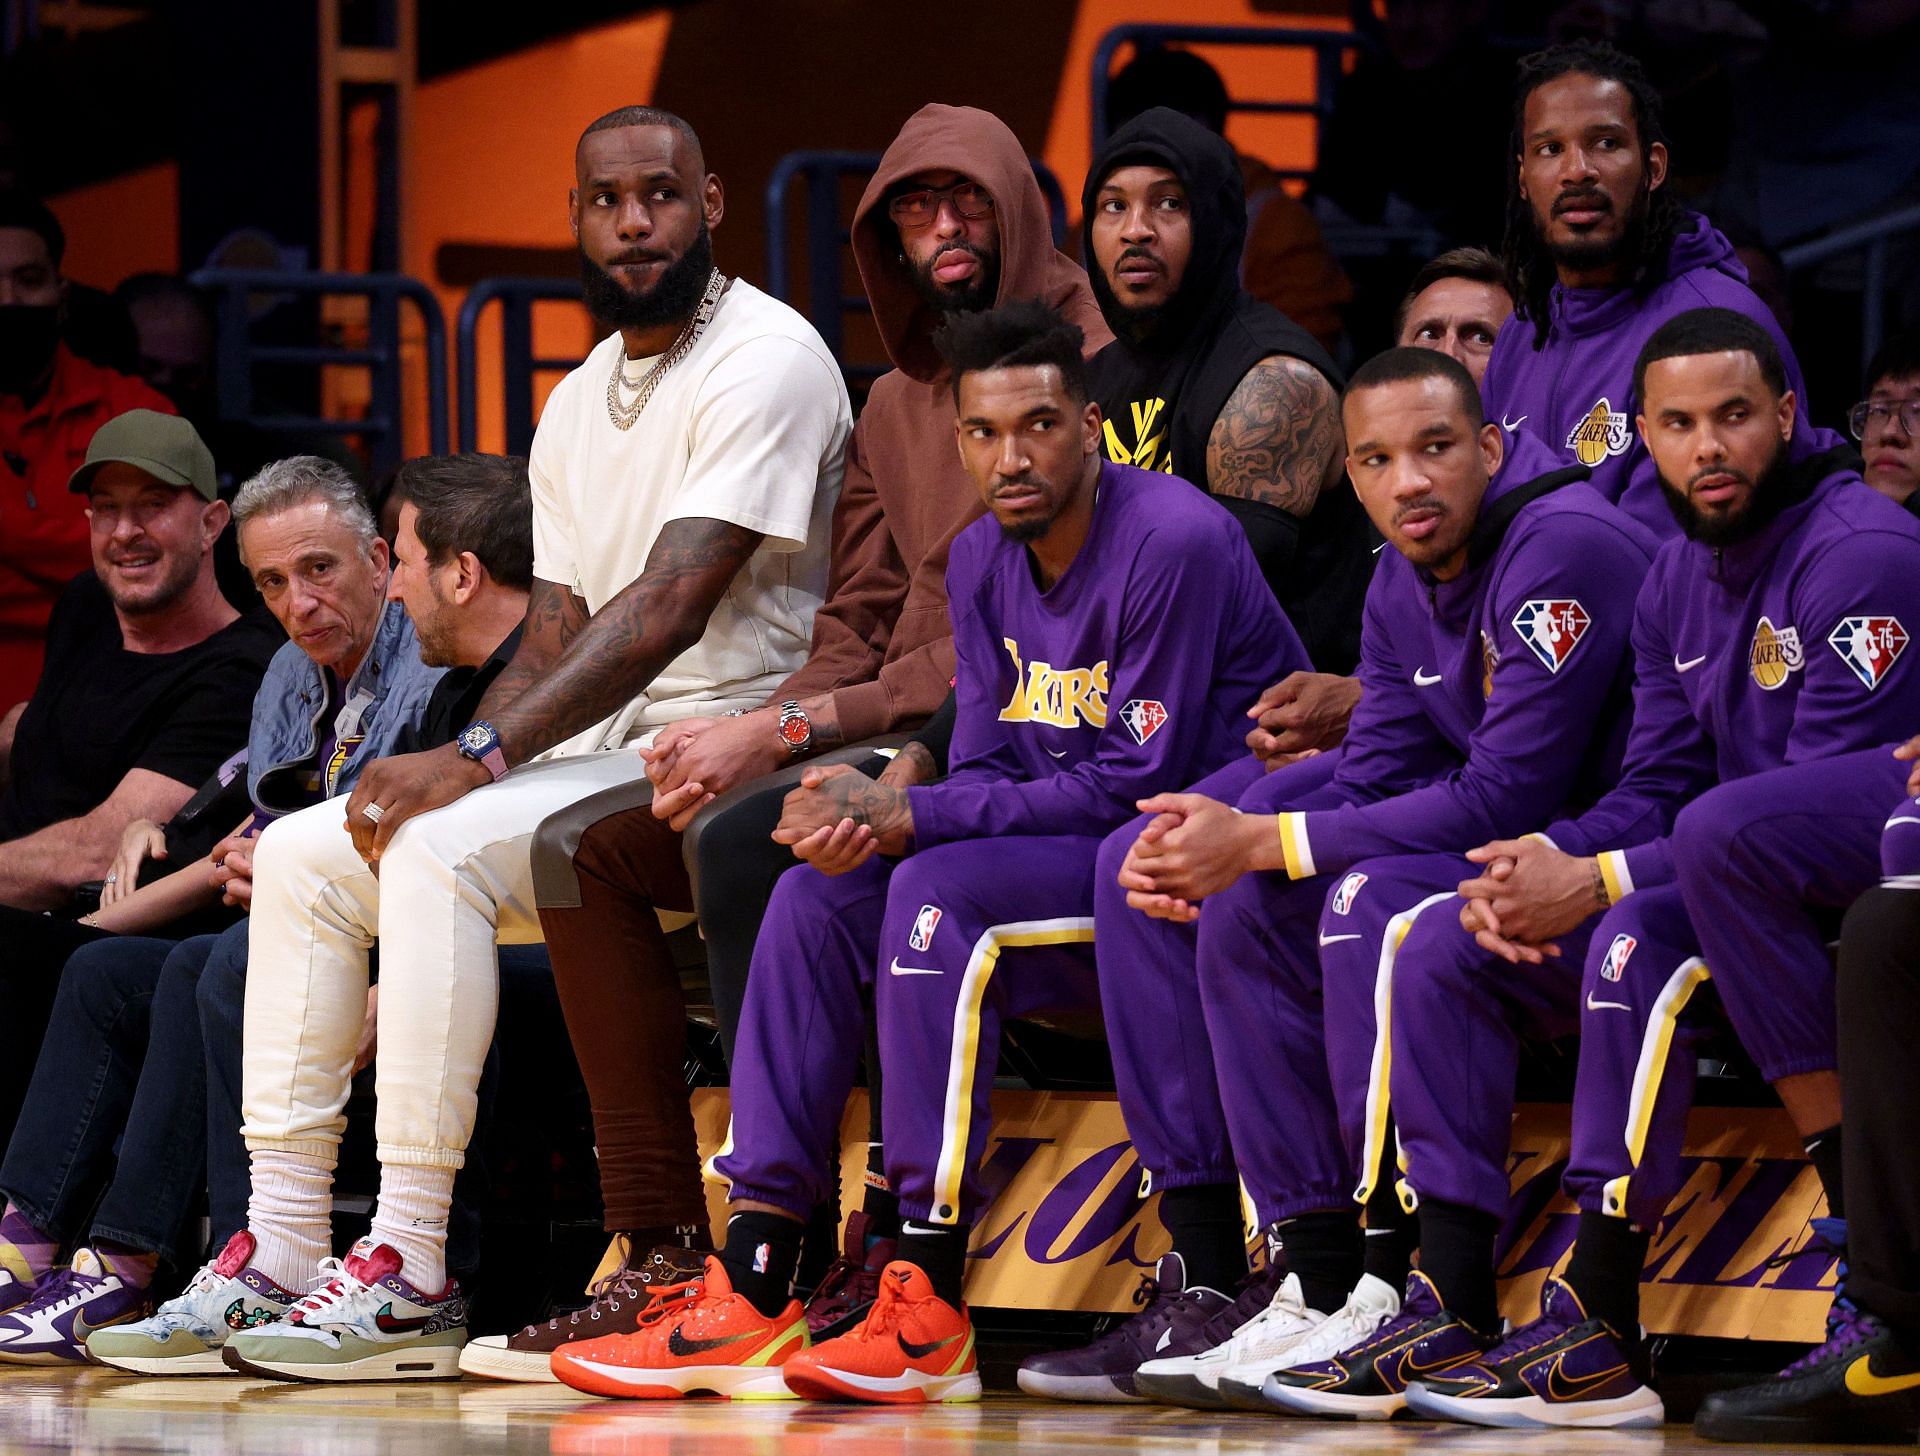 LeBron James (in white), Anthony Davis (in tan) and Carmelo Anthony (in black) of the LA Lakers watch.